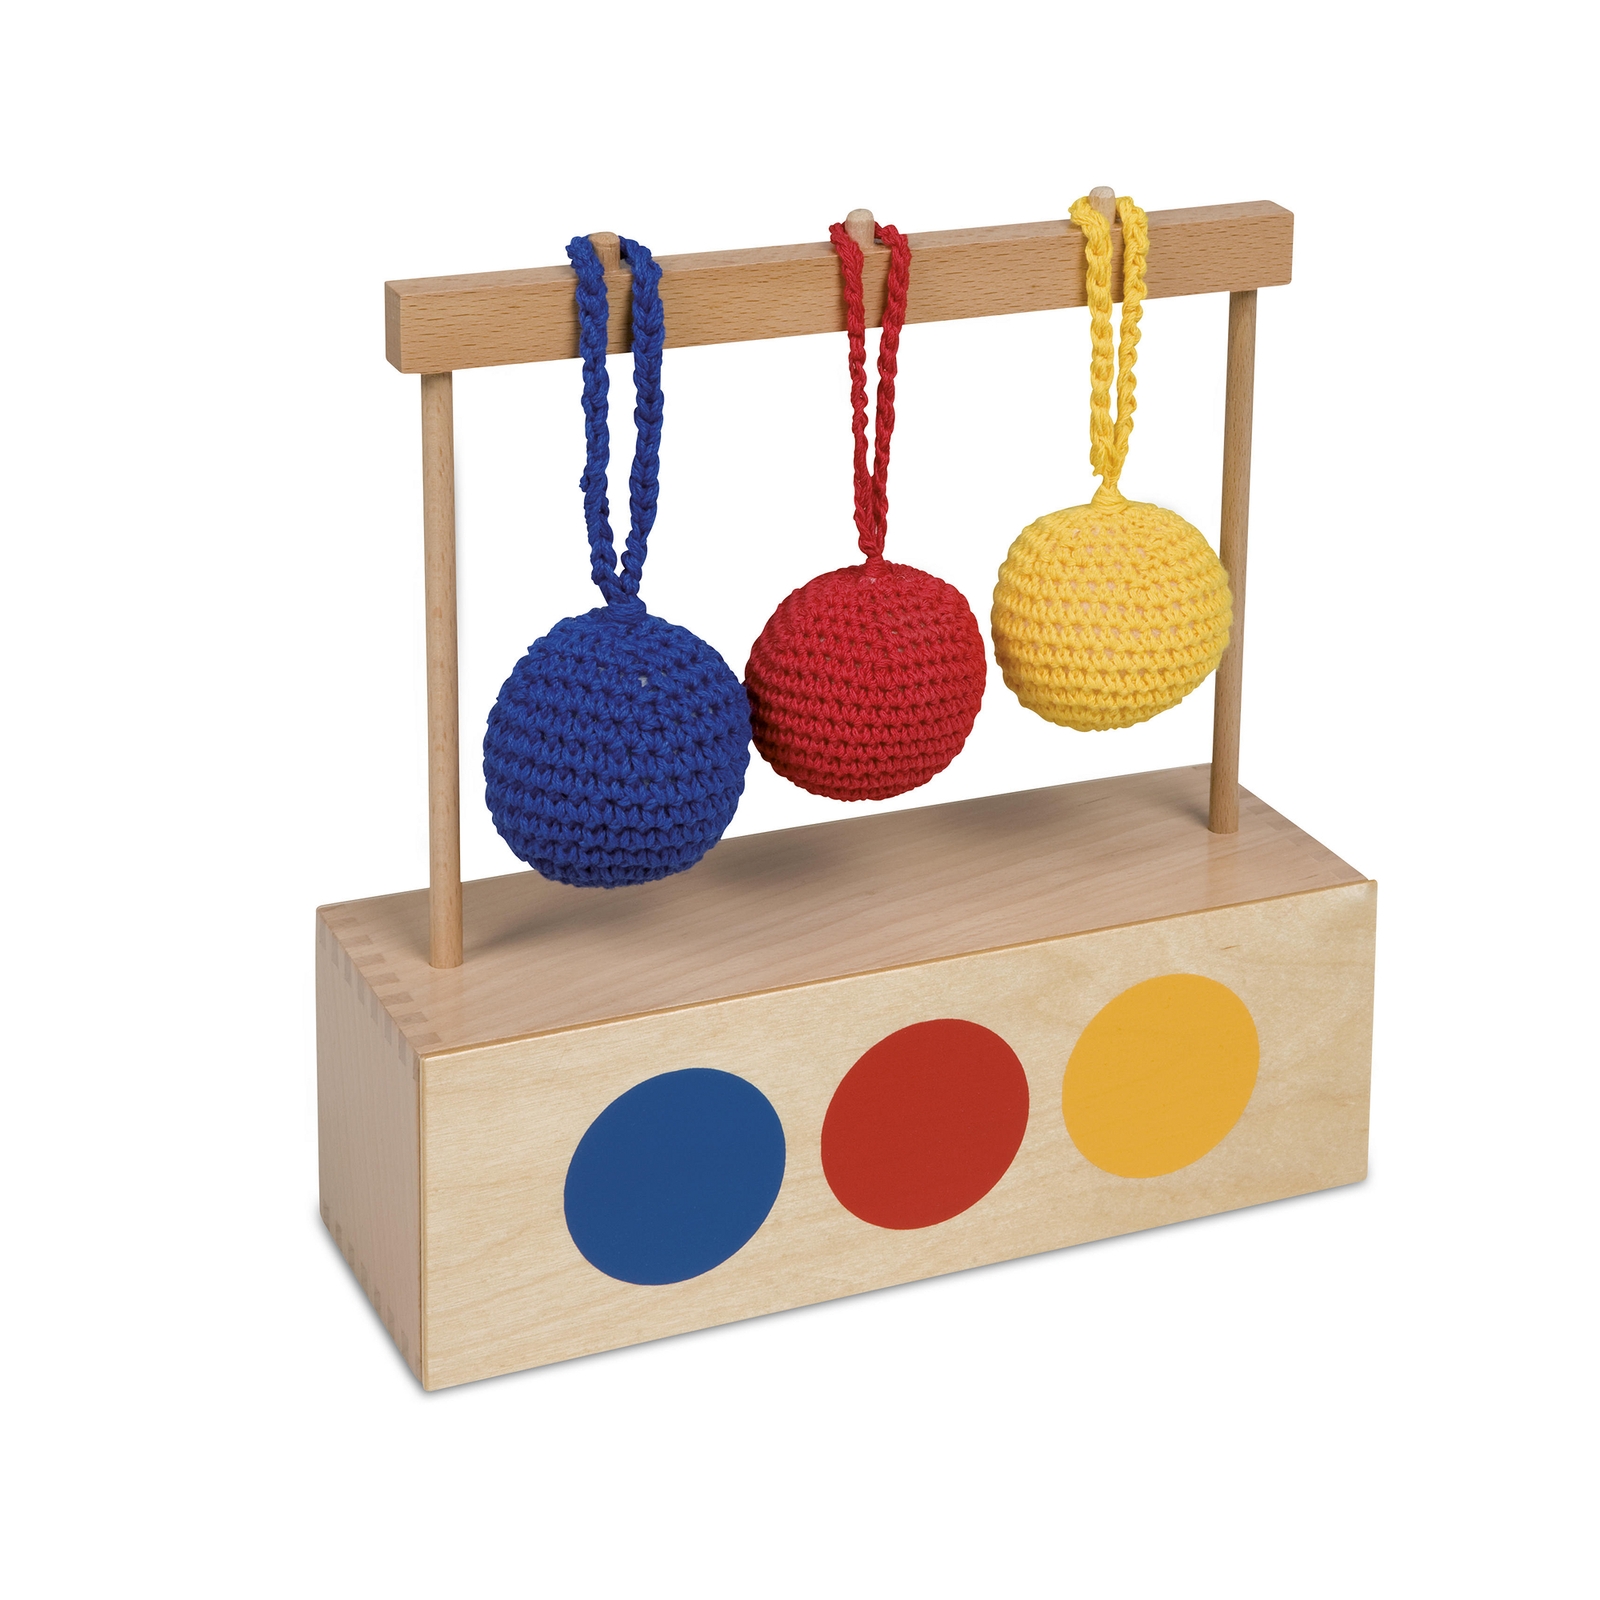 Imbucare Box With 3 Coloured Knit Balls